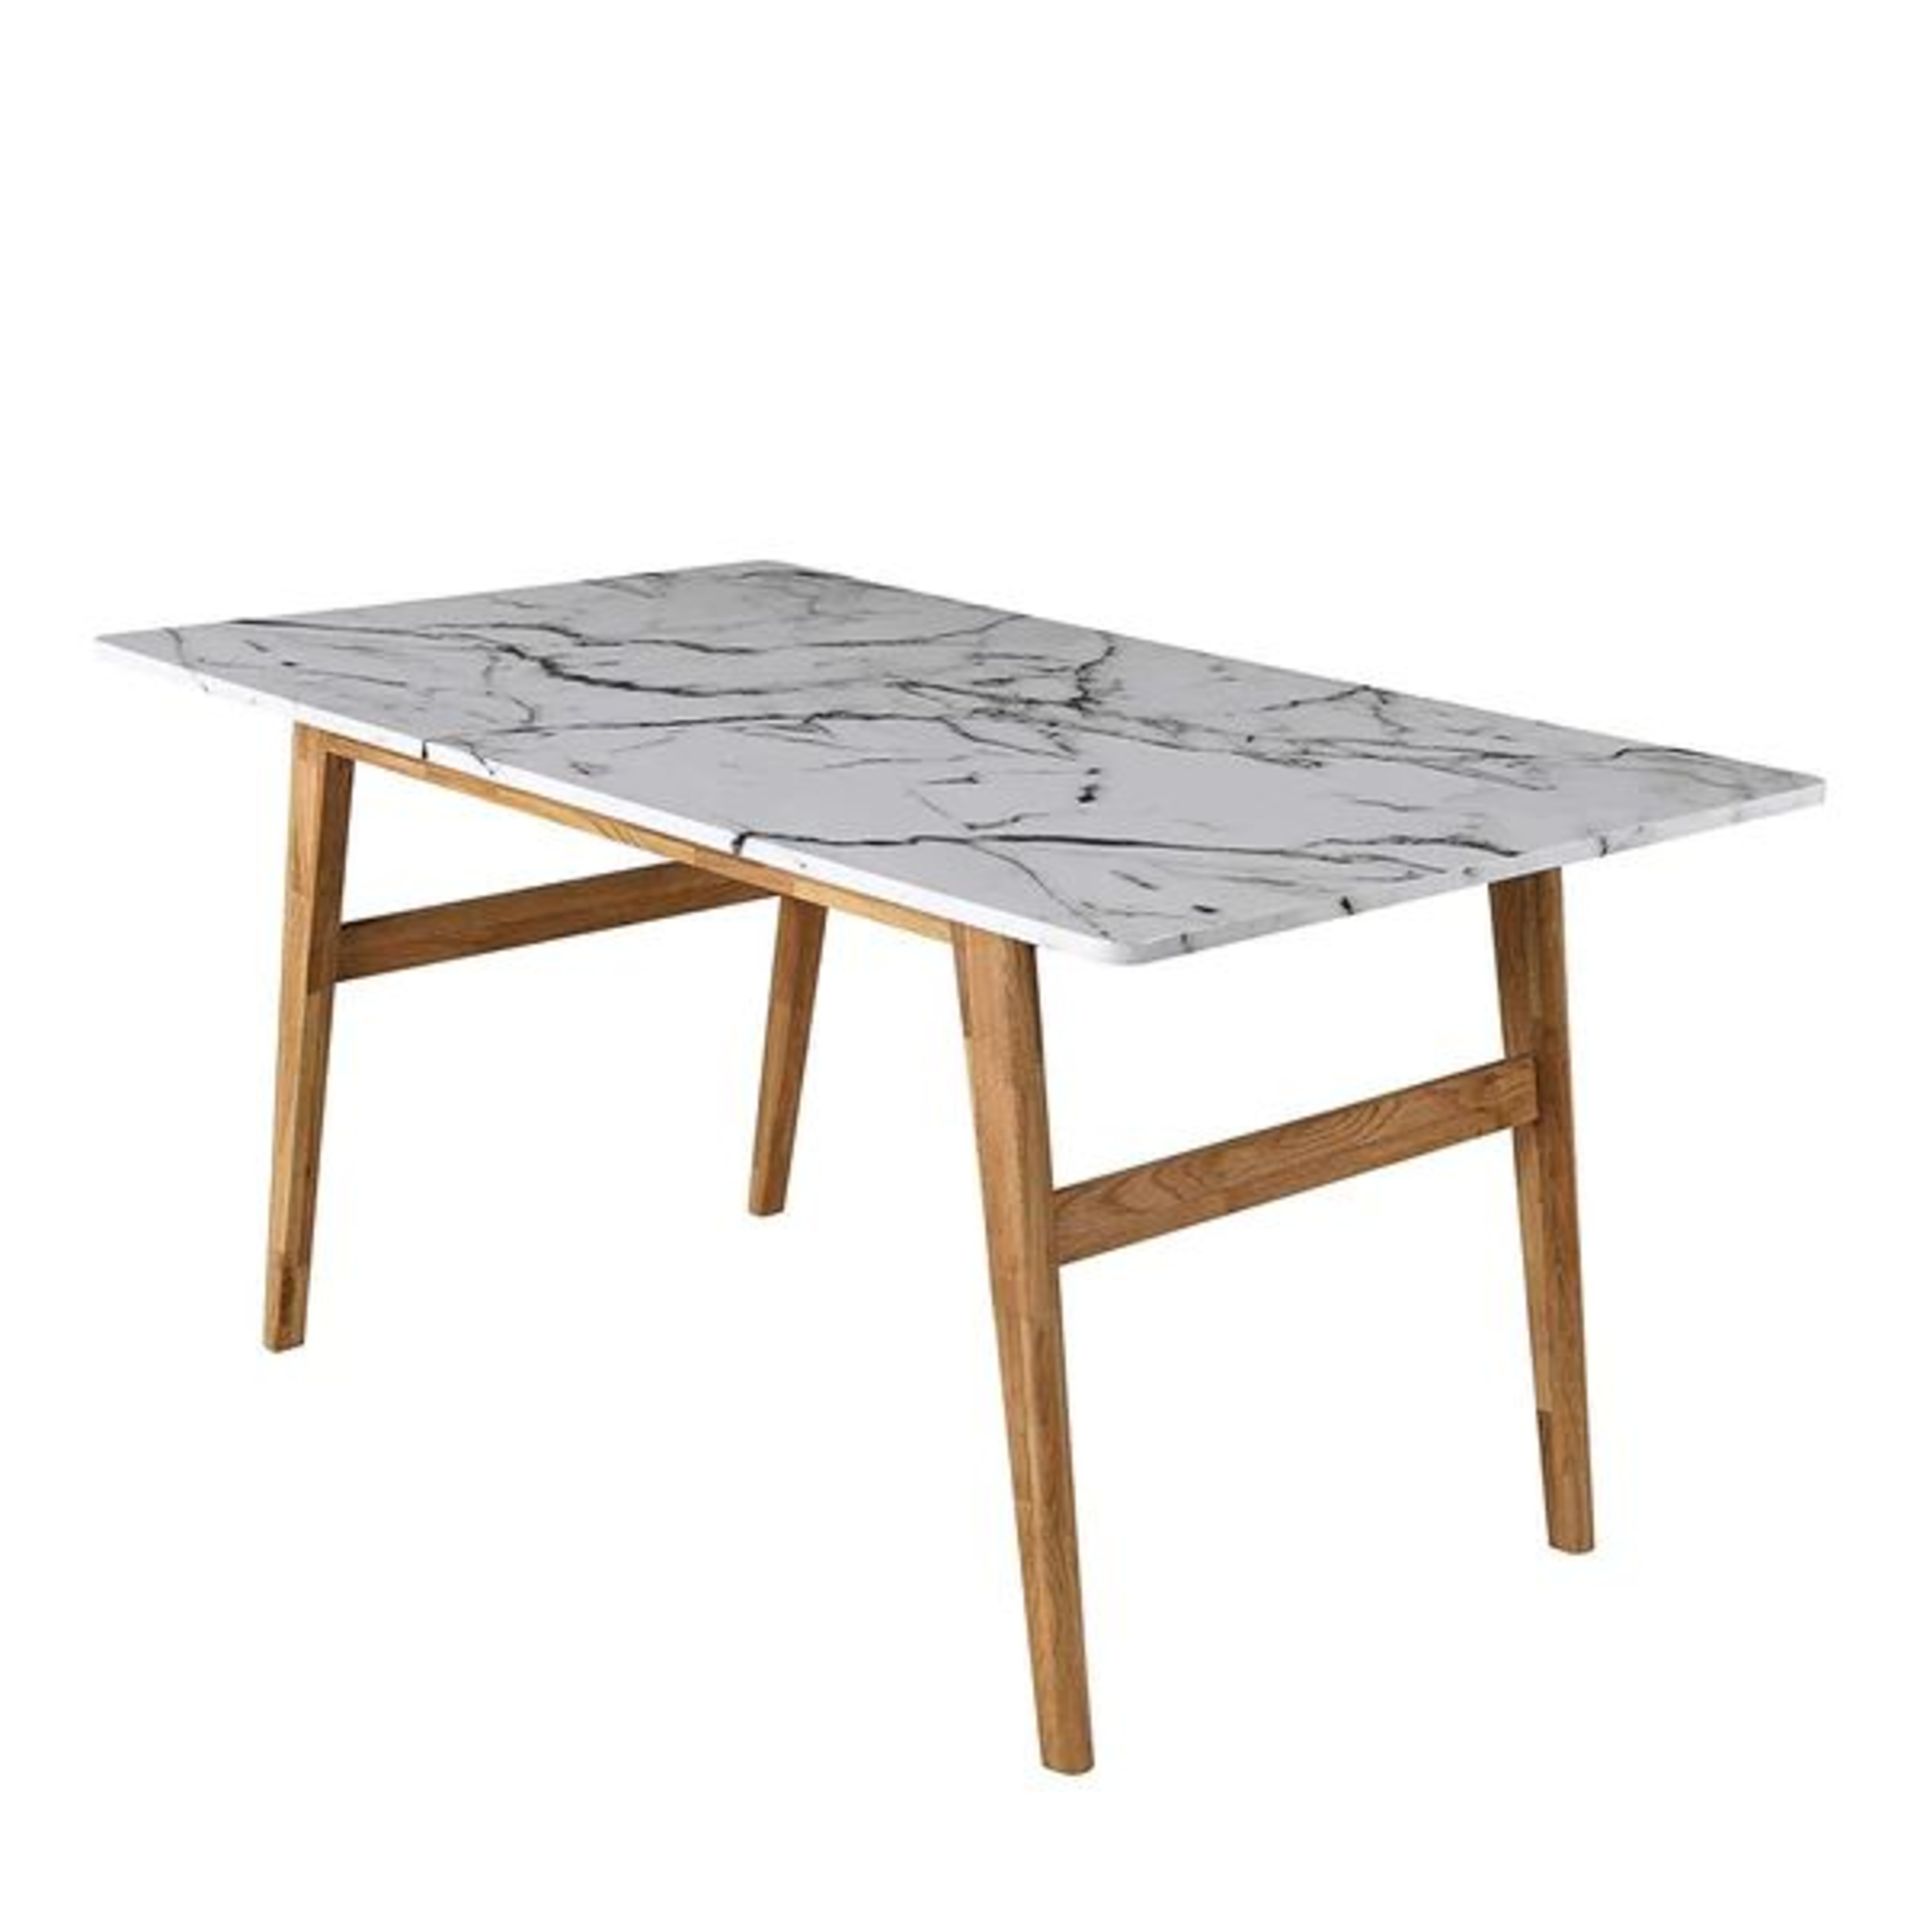 ASCONA White Marble Effect 6-Seater Dining Table with Solid Oak Legs. - BI. RRP £439.99. Inspired by - Image 2 of 2